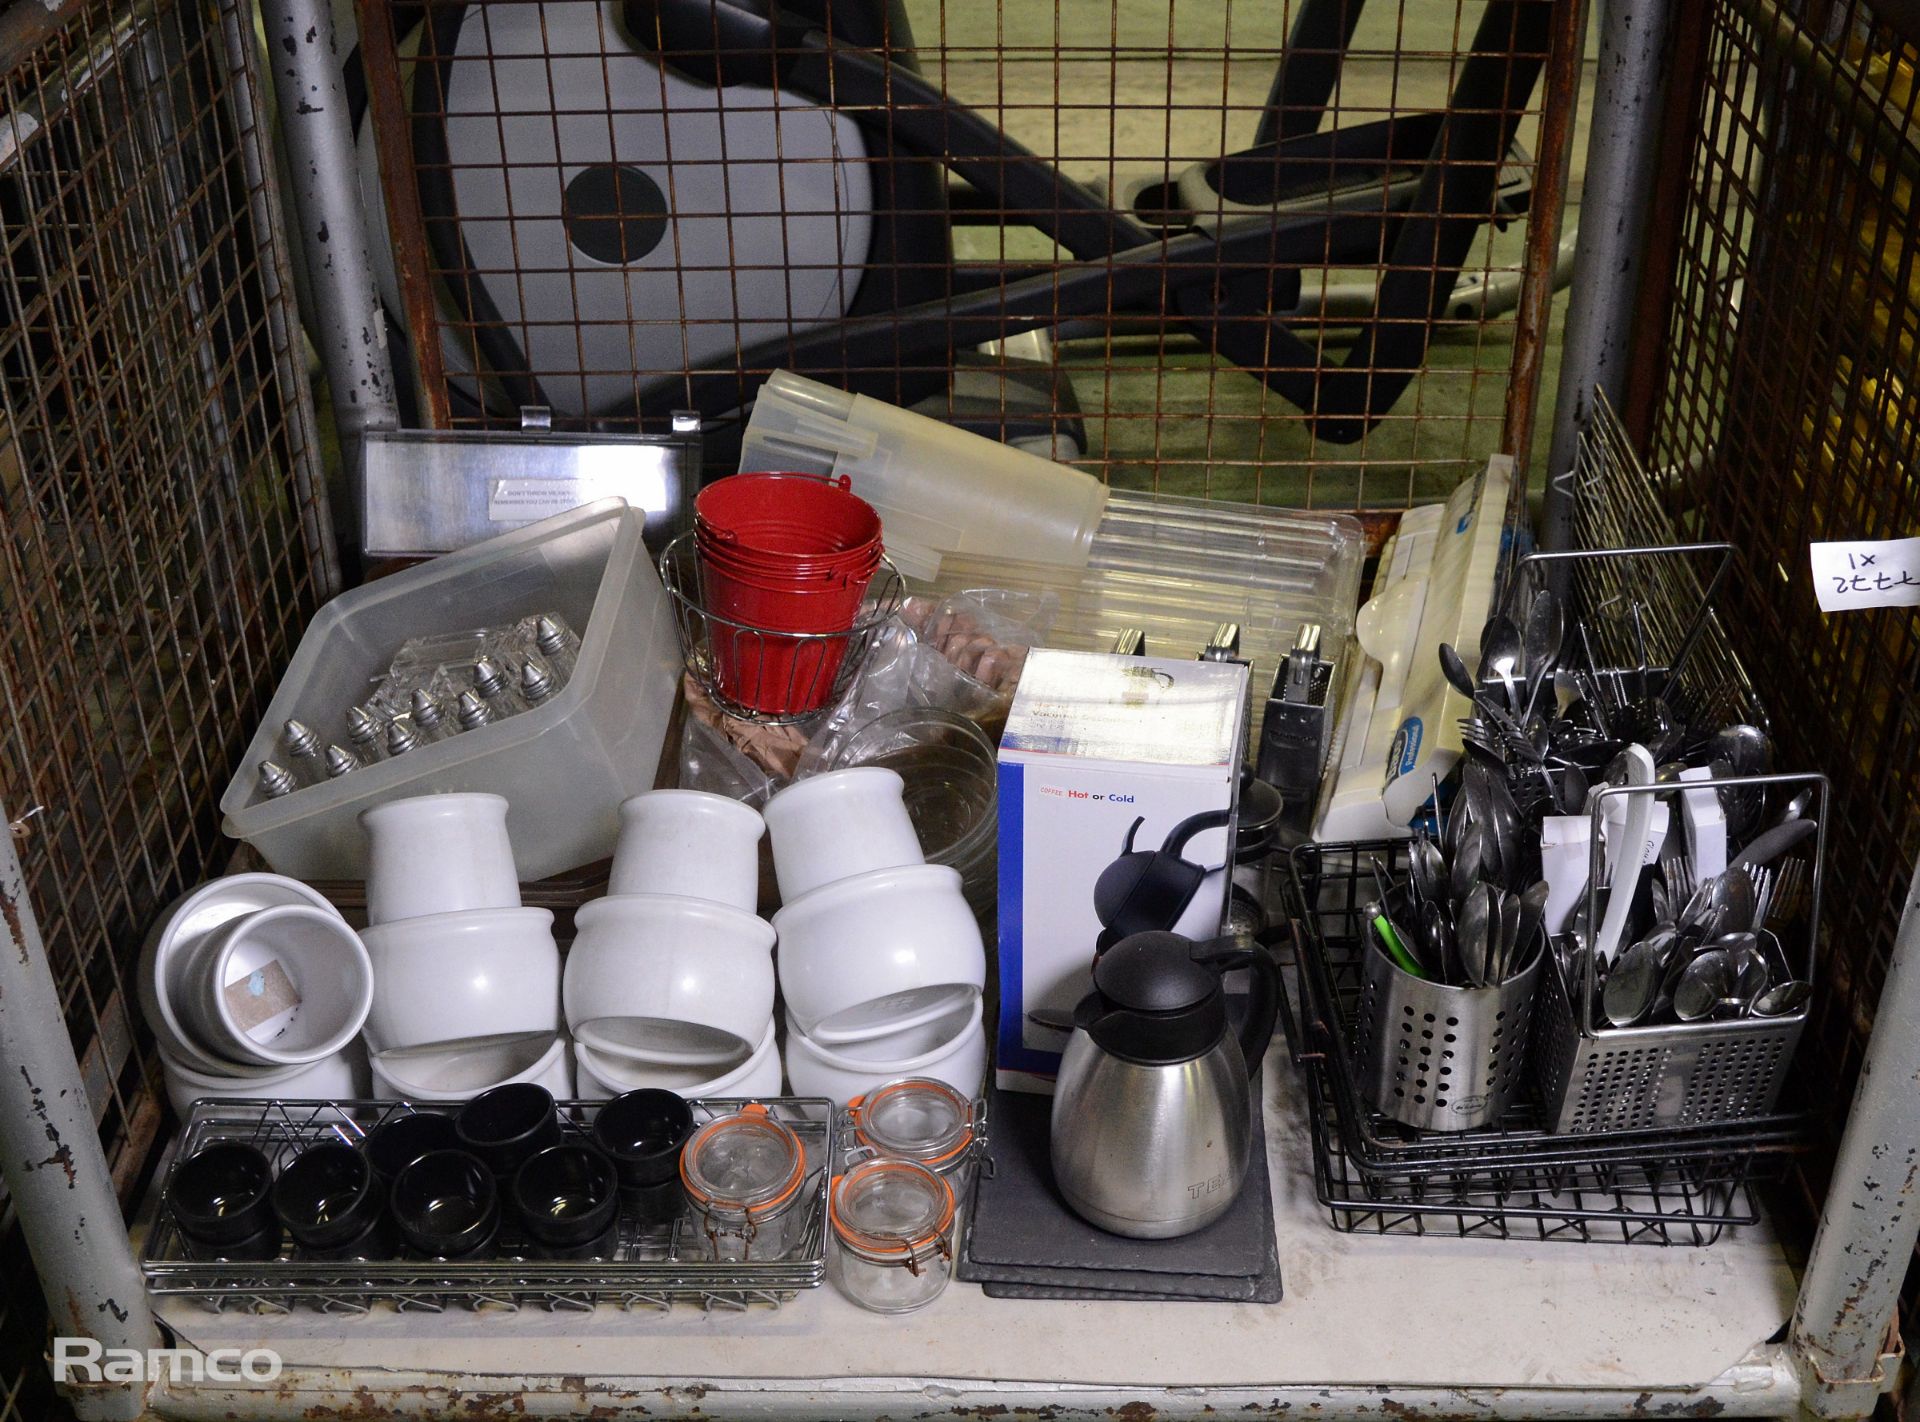 Kitchenware - cutlery and storage tubs